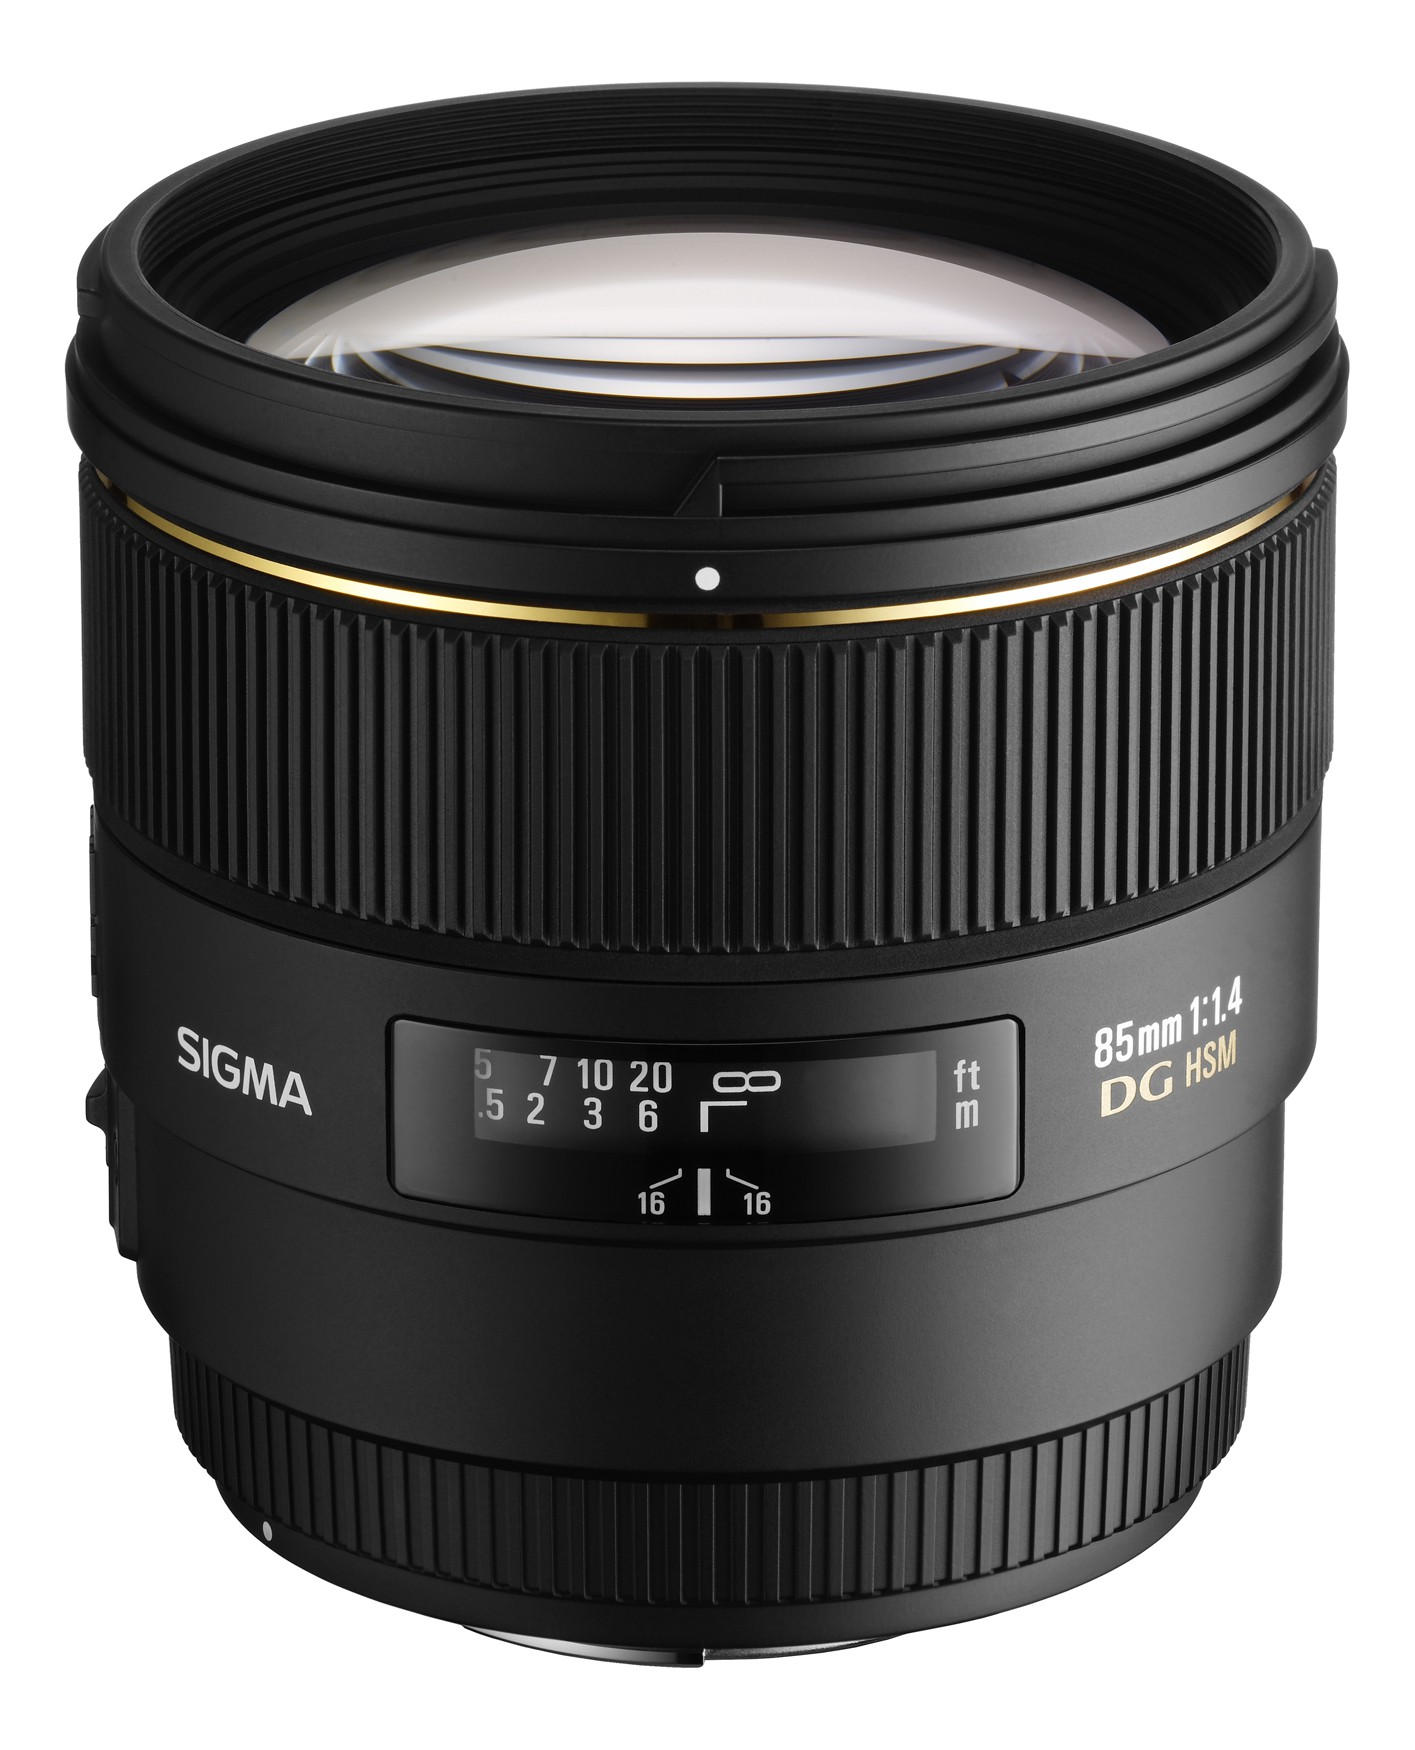 Fast short telephoto lens by Sigma for Canon EF full-frame system.